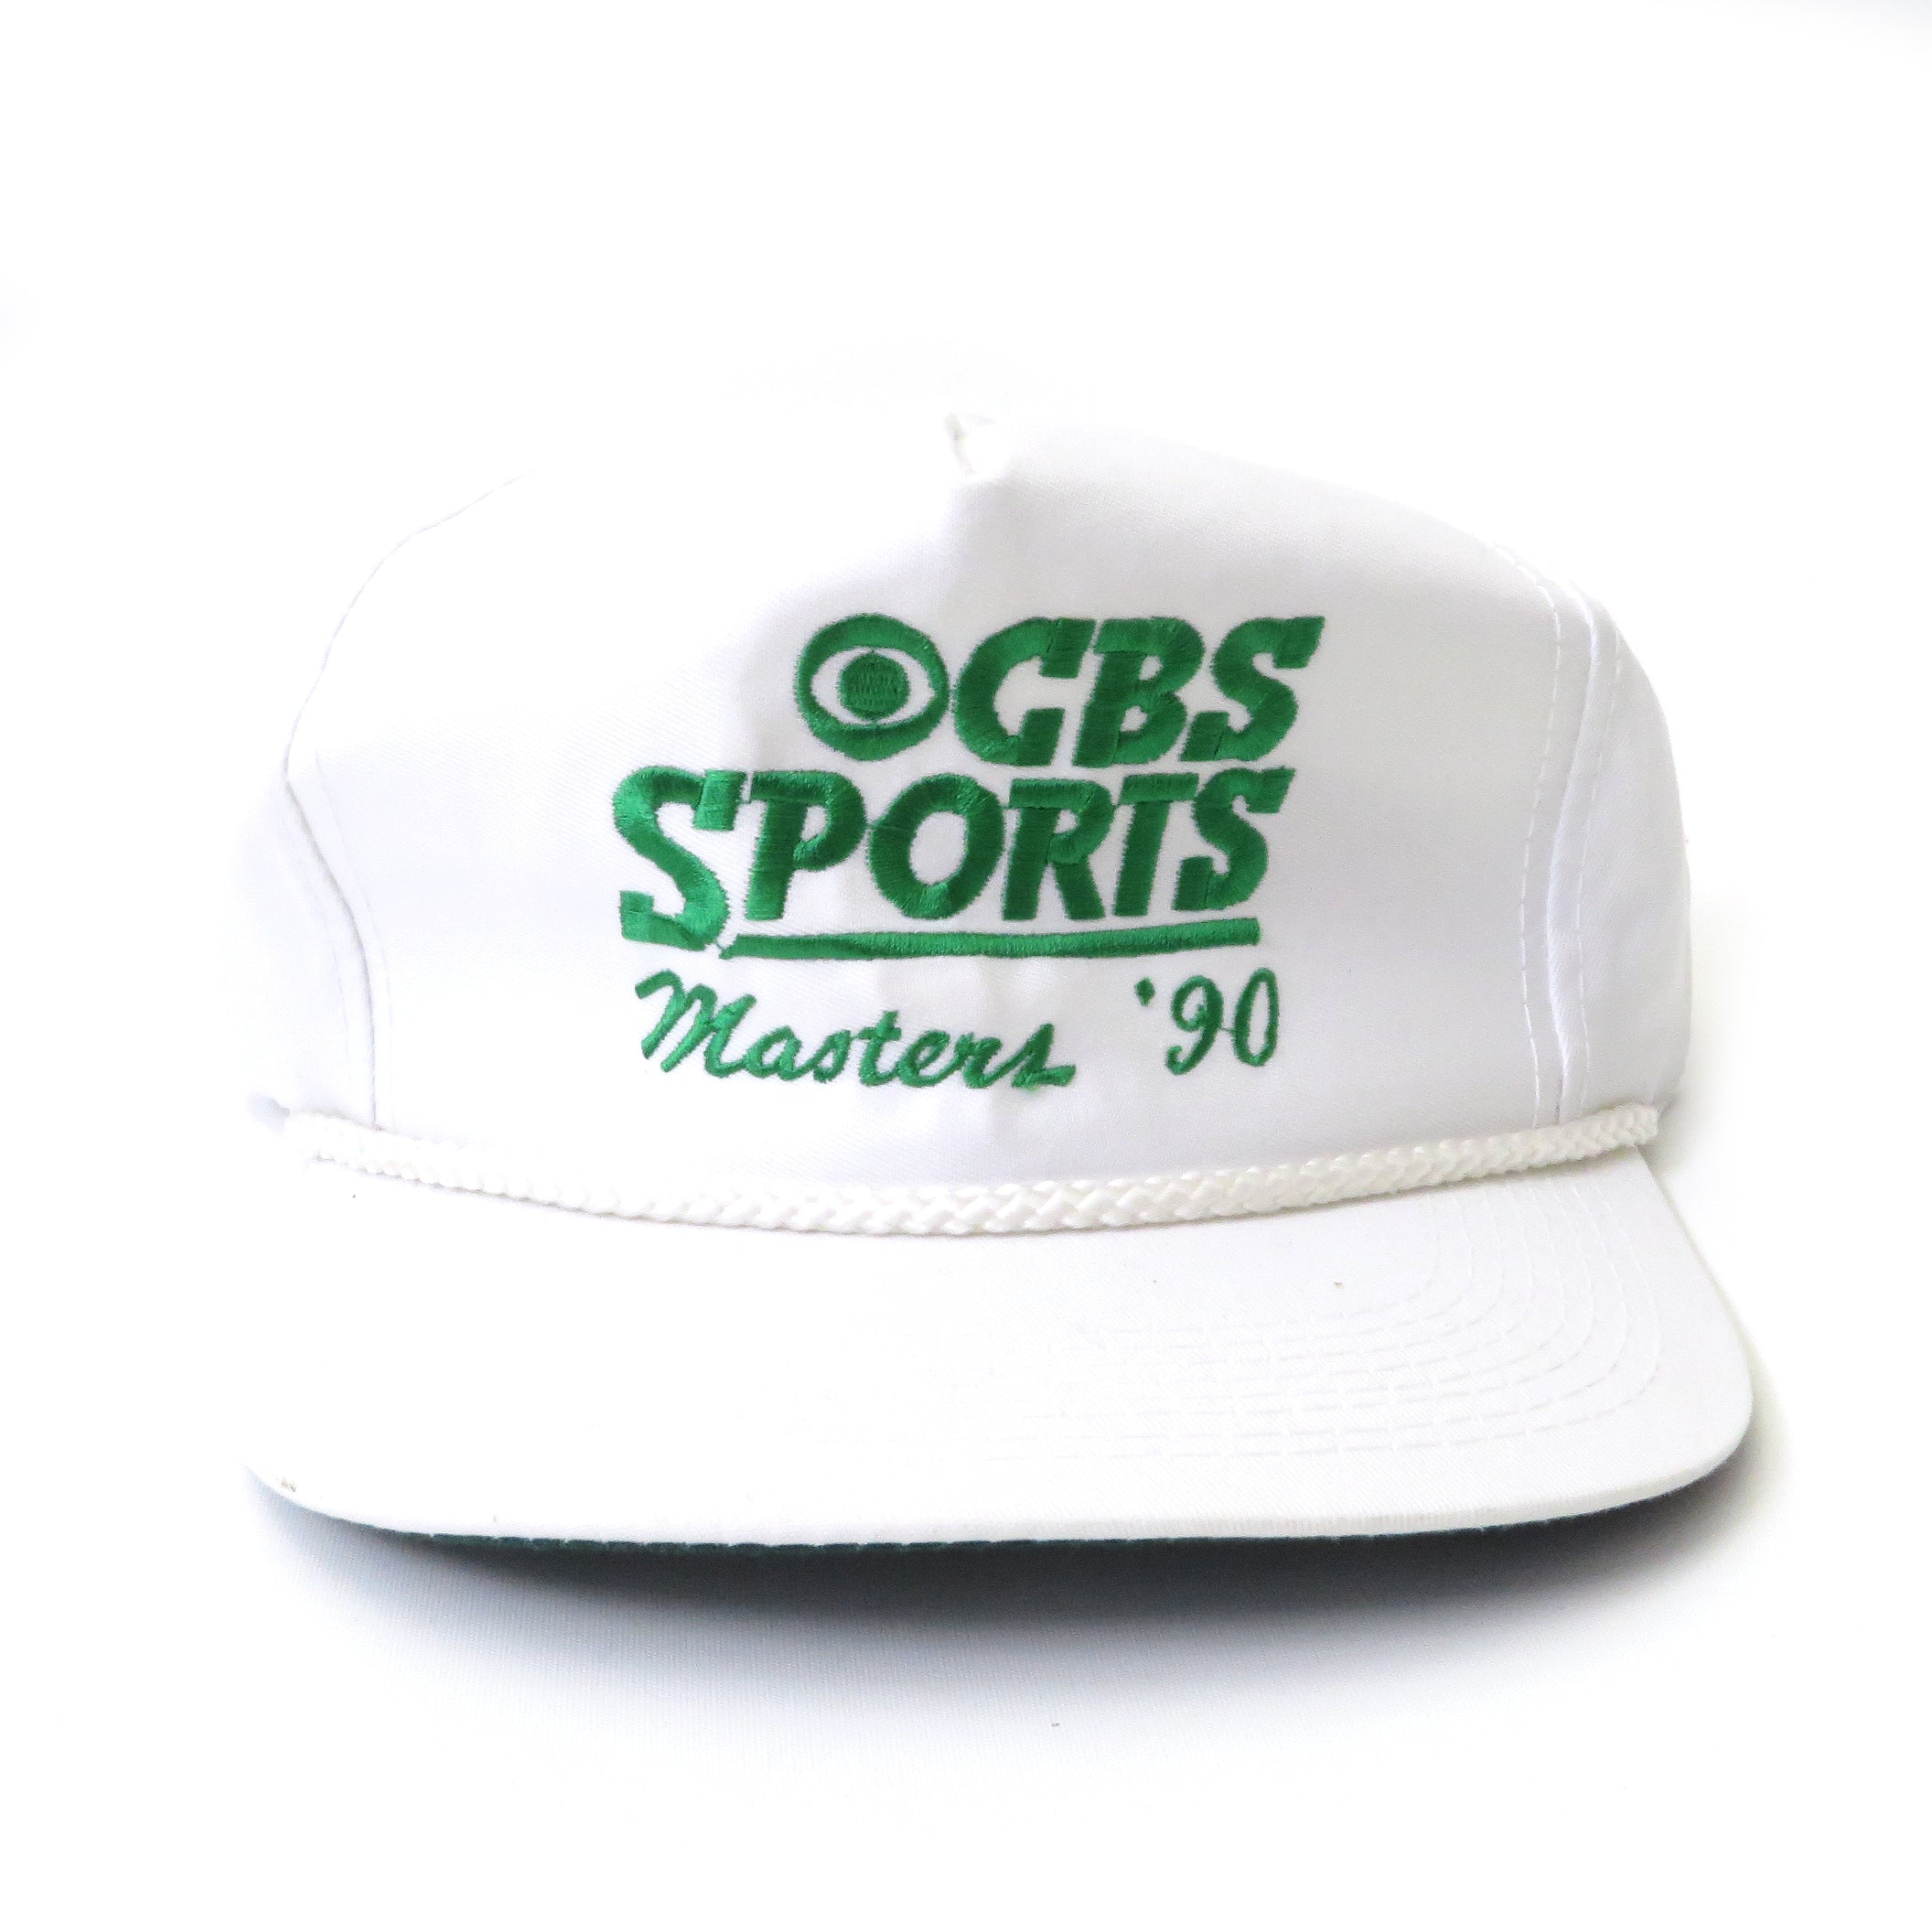 Vintage 1990 The Masters CBS Sports Strapback Hat